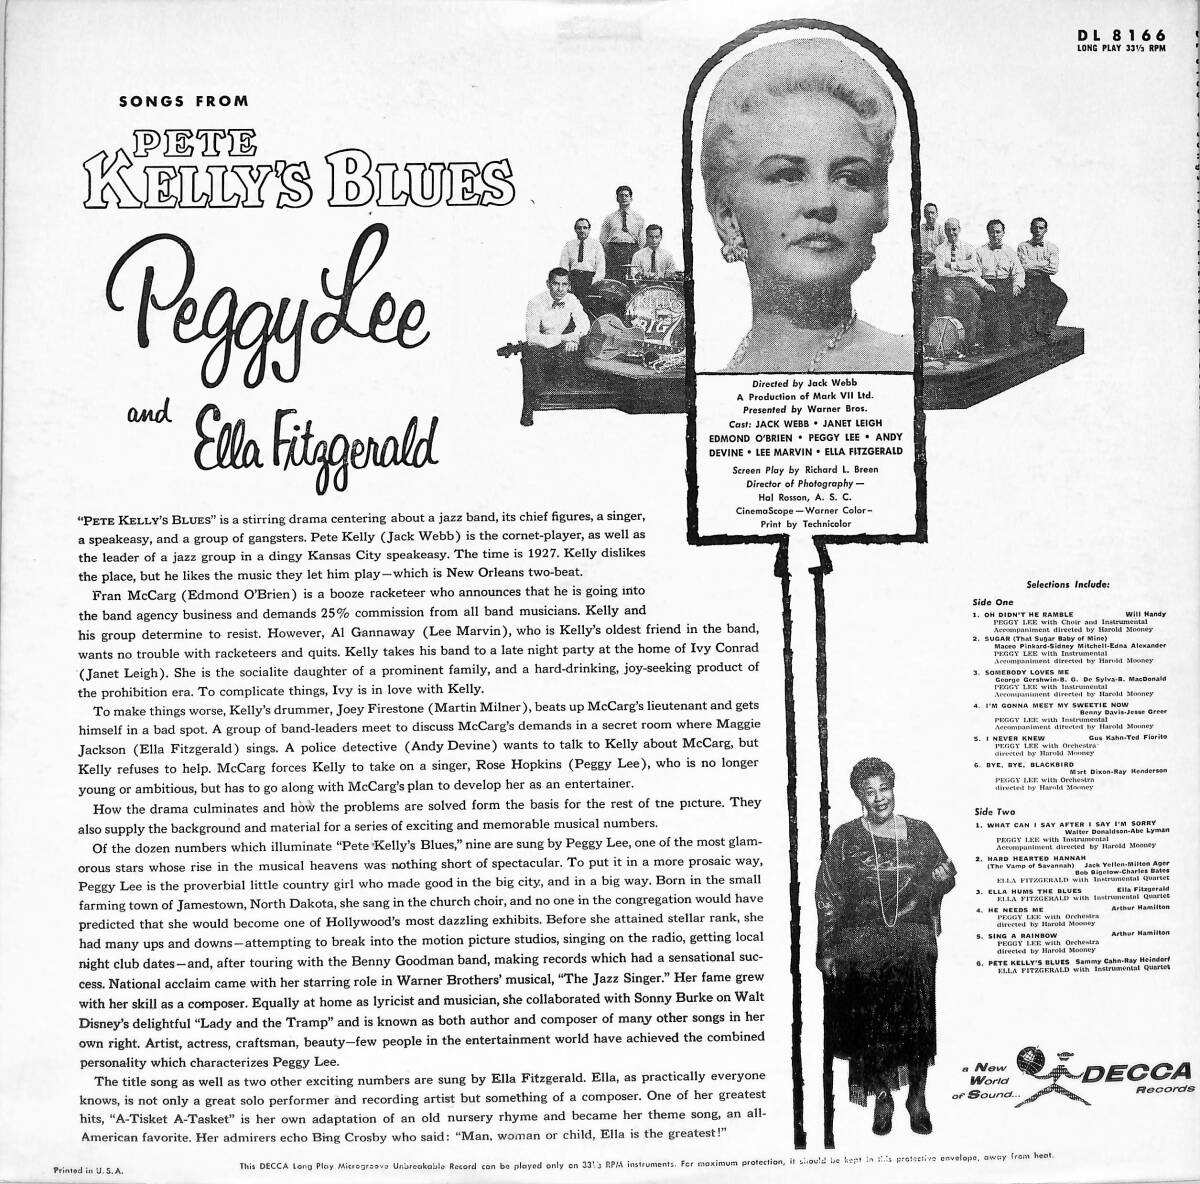 A00591480/LP/ペギー・リー (PEGGY LEE) & エラ・フィッツジェラルド (ELLA FITZGERALD)「Songs From Pete Kellys Blues」の画像2